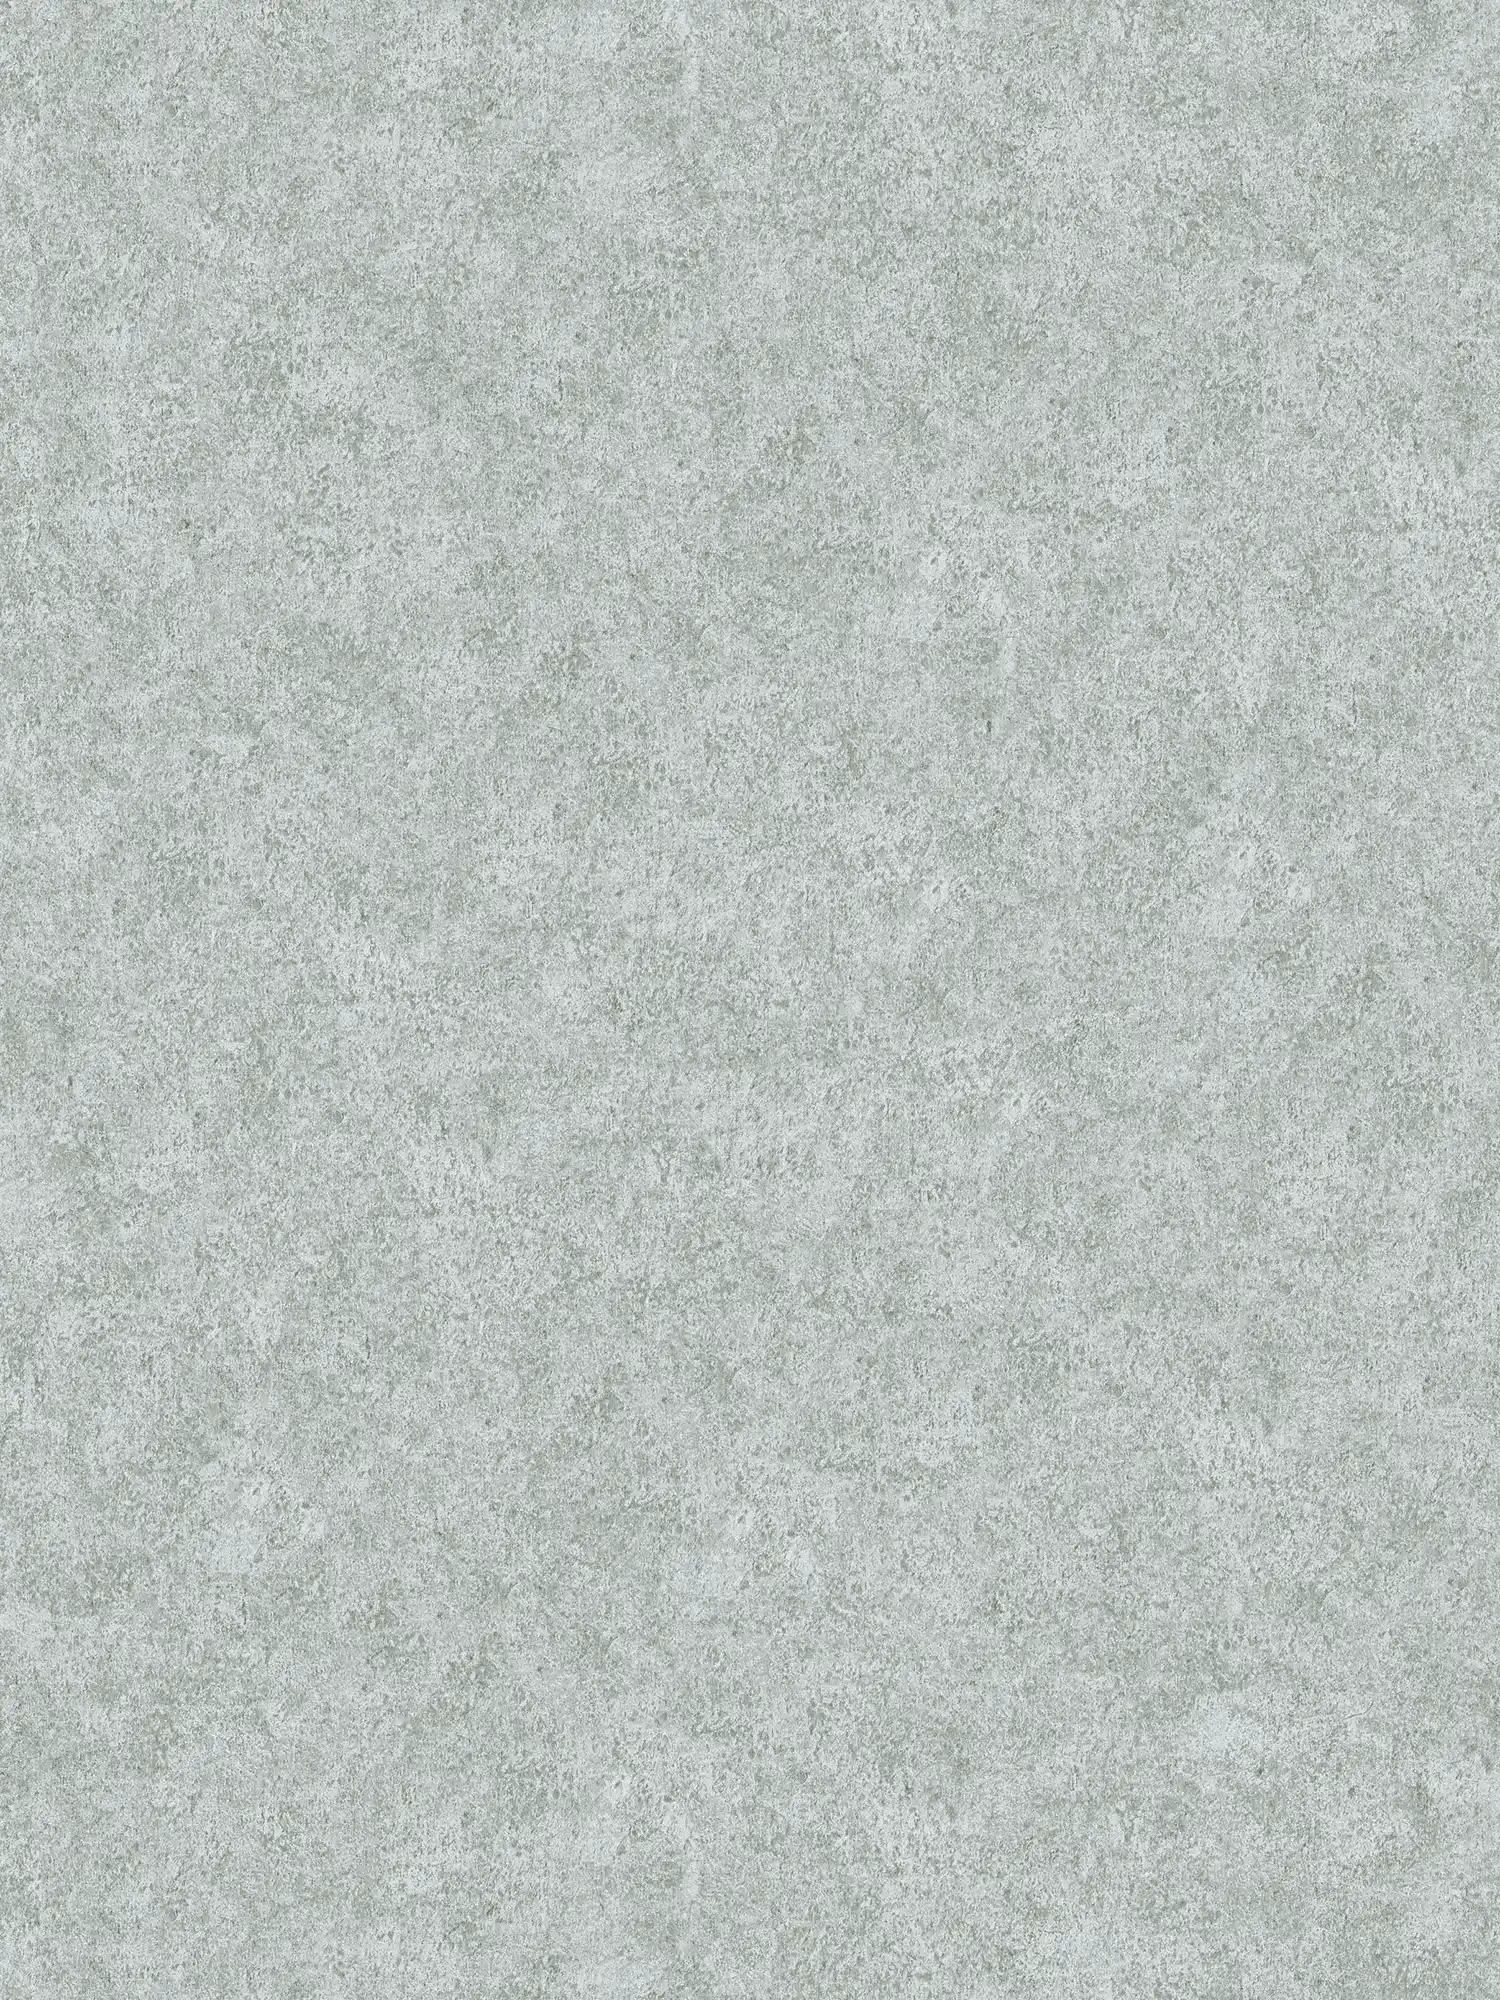 Plain wallpaper grey with mottled natural stone look
